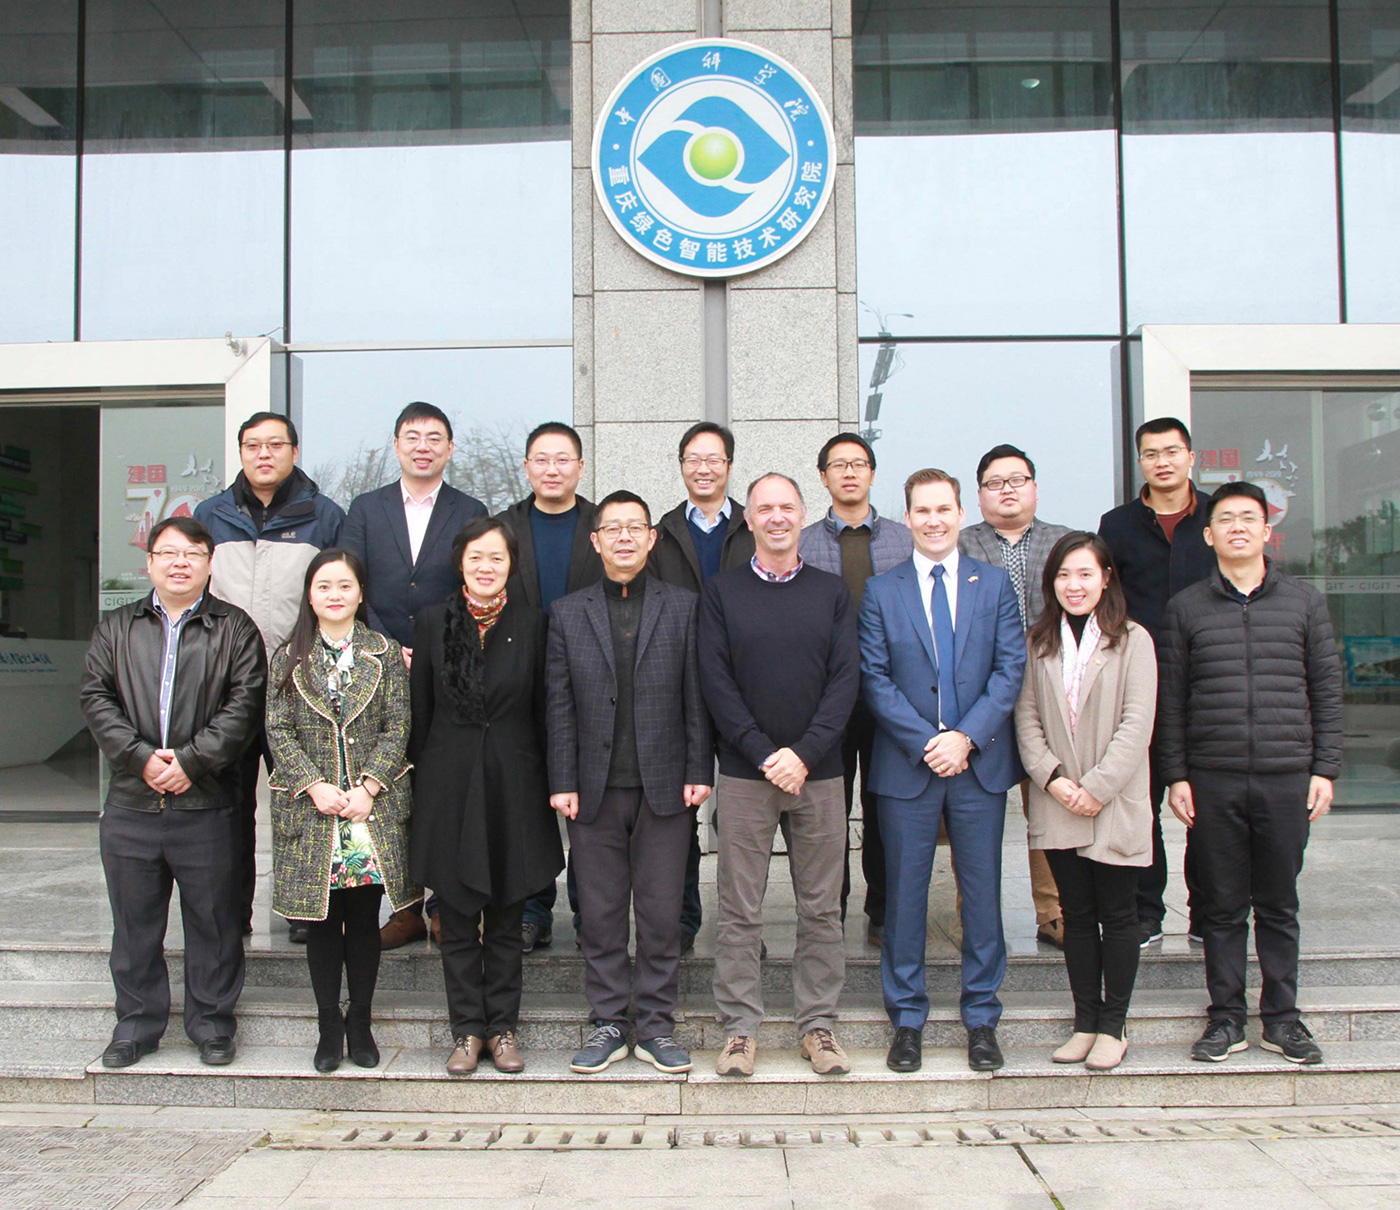 Centre Director Paul Mulvaney launches the ACSRF in Chongqing, China in November